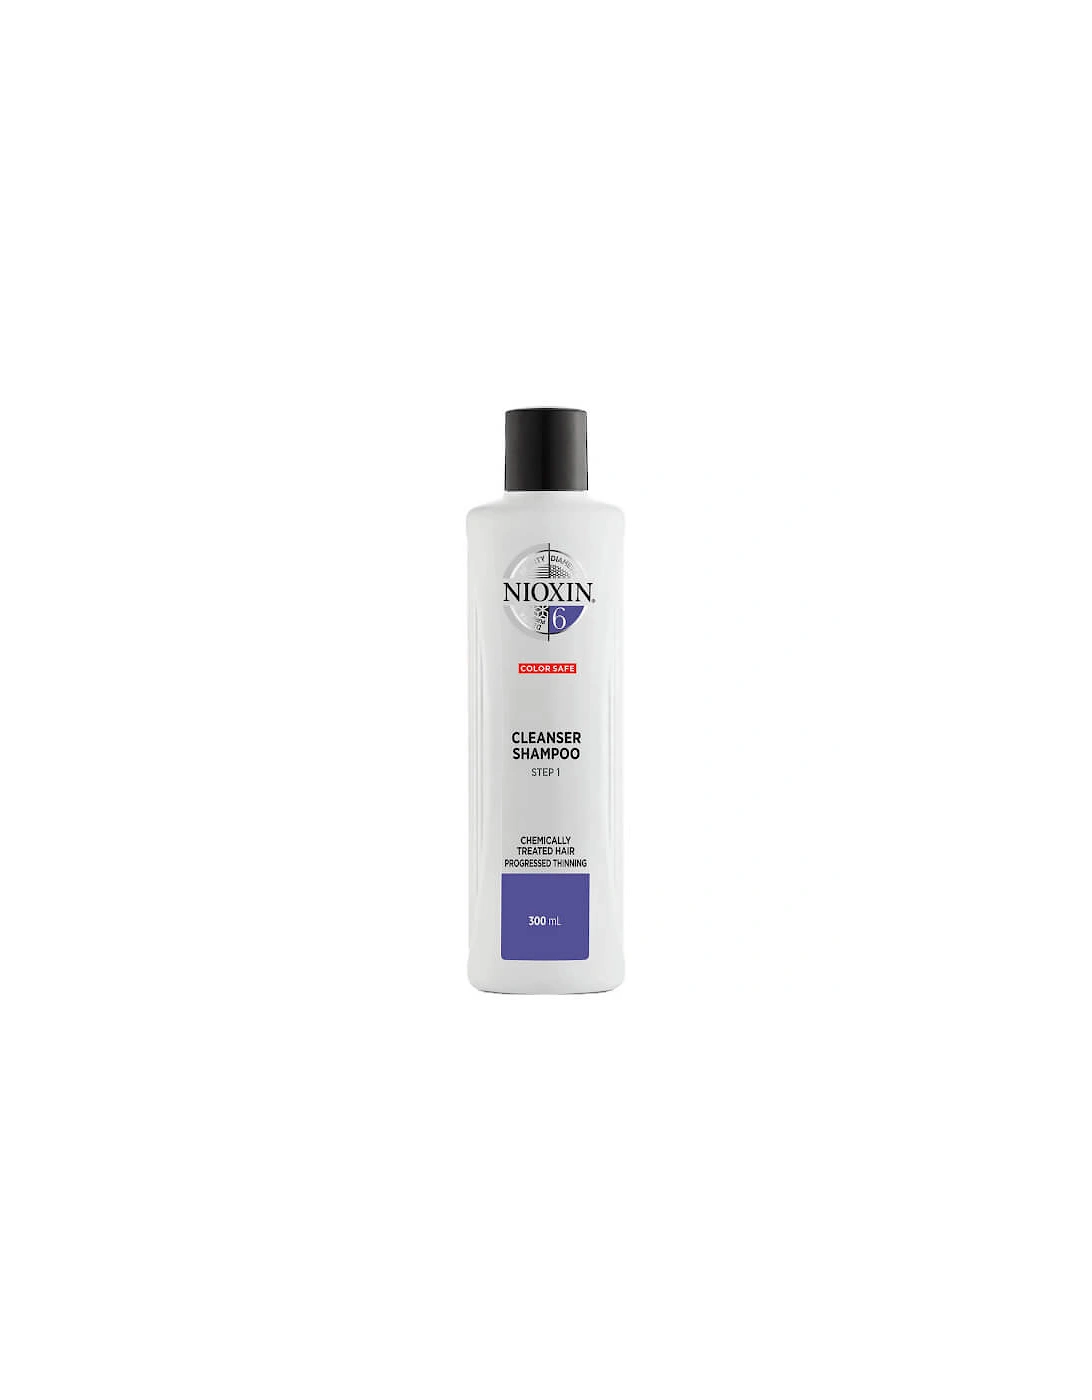 3-Part System 6 Cleanser Shampoo for Chemically Treated Hair with Progressed Thinning 300ml - NIOXIN, 2 of 1